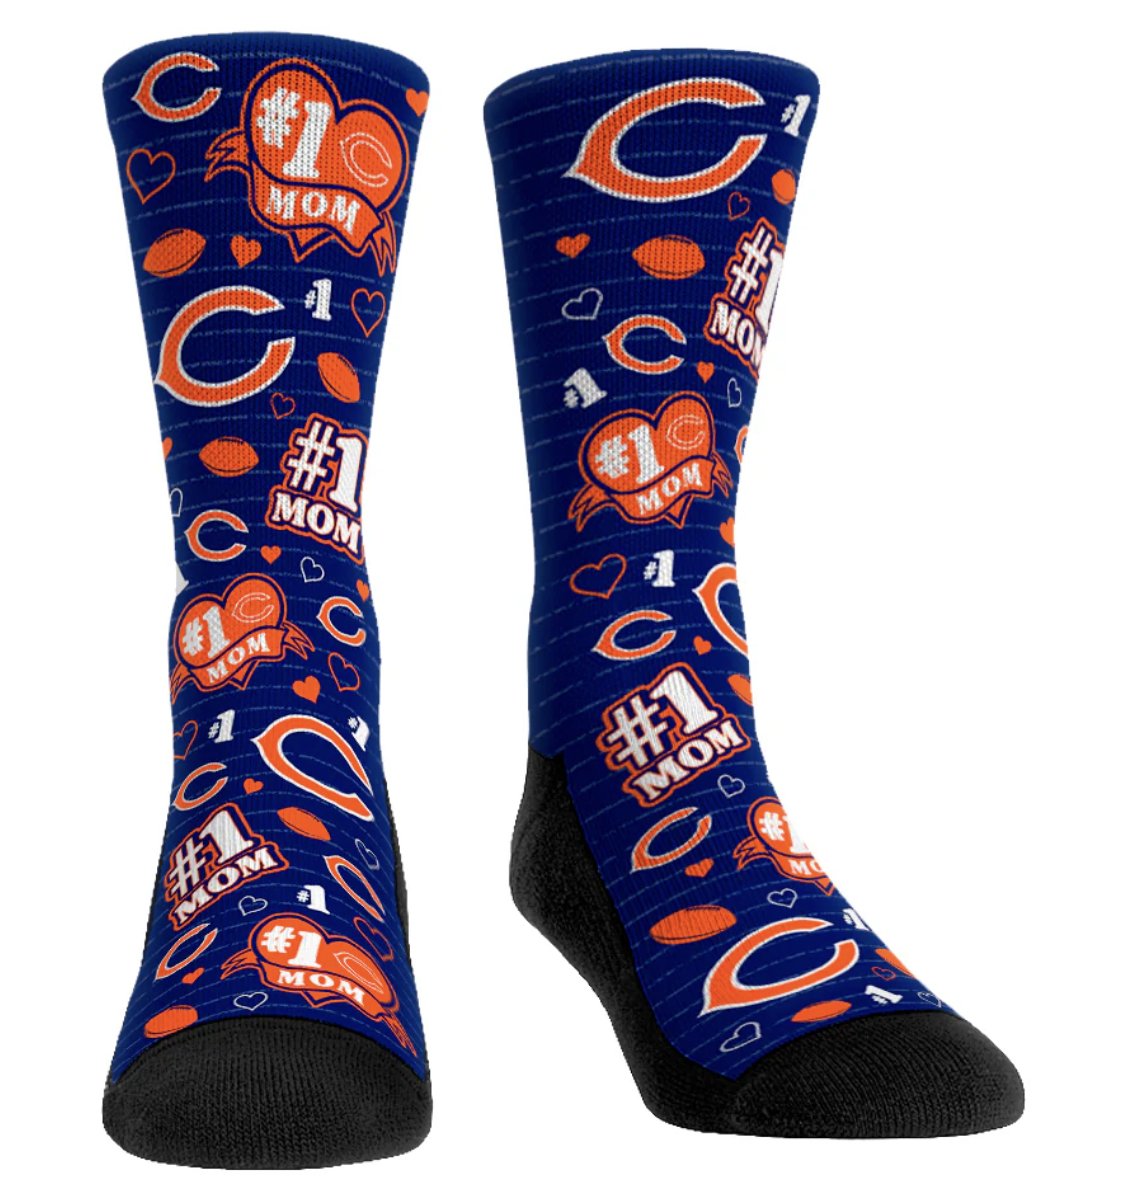 #MothersDay is right around the corner 🌺 Cheer the #Bears onto victory in style, with Mom's new favorite gameday socks! #DaBears ➡️ rockemsocks.com/collections/nf…